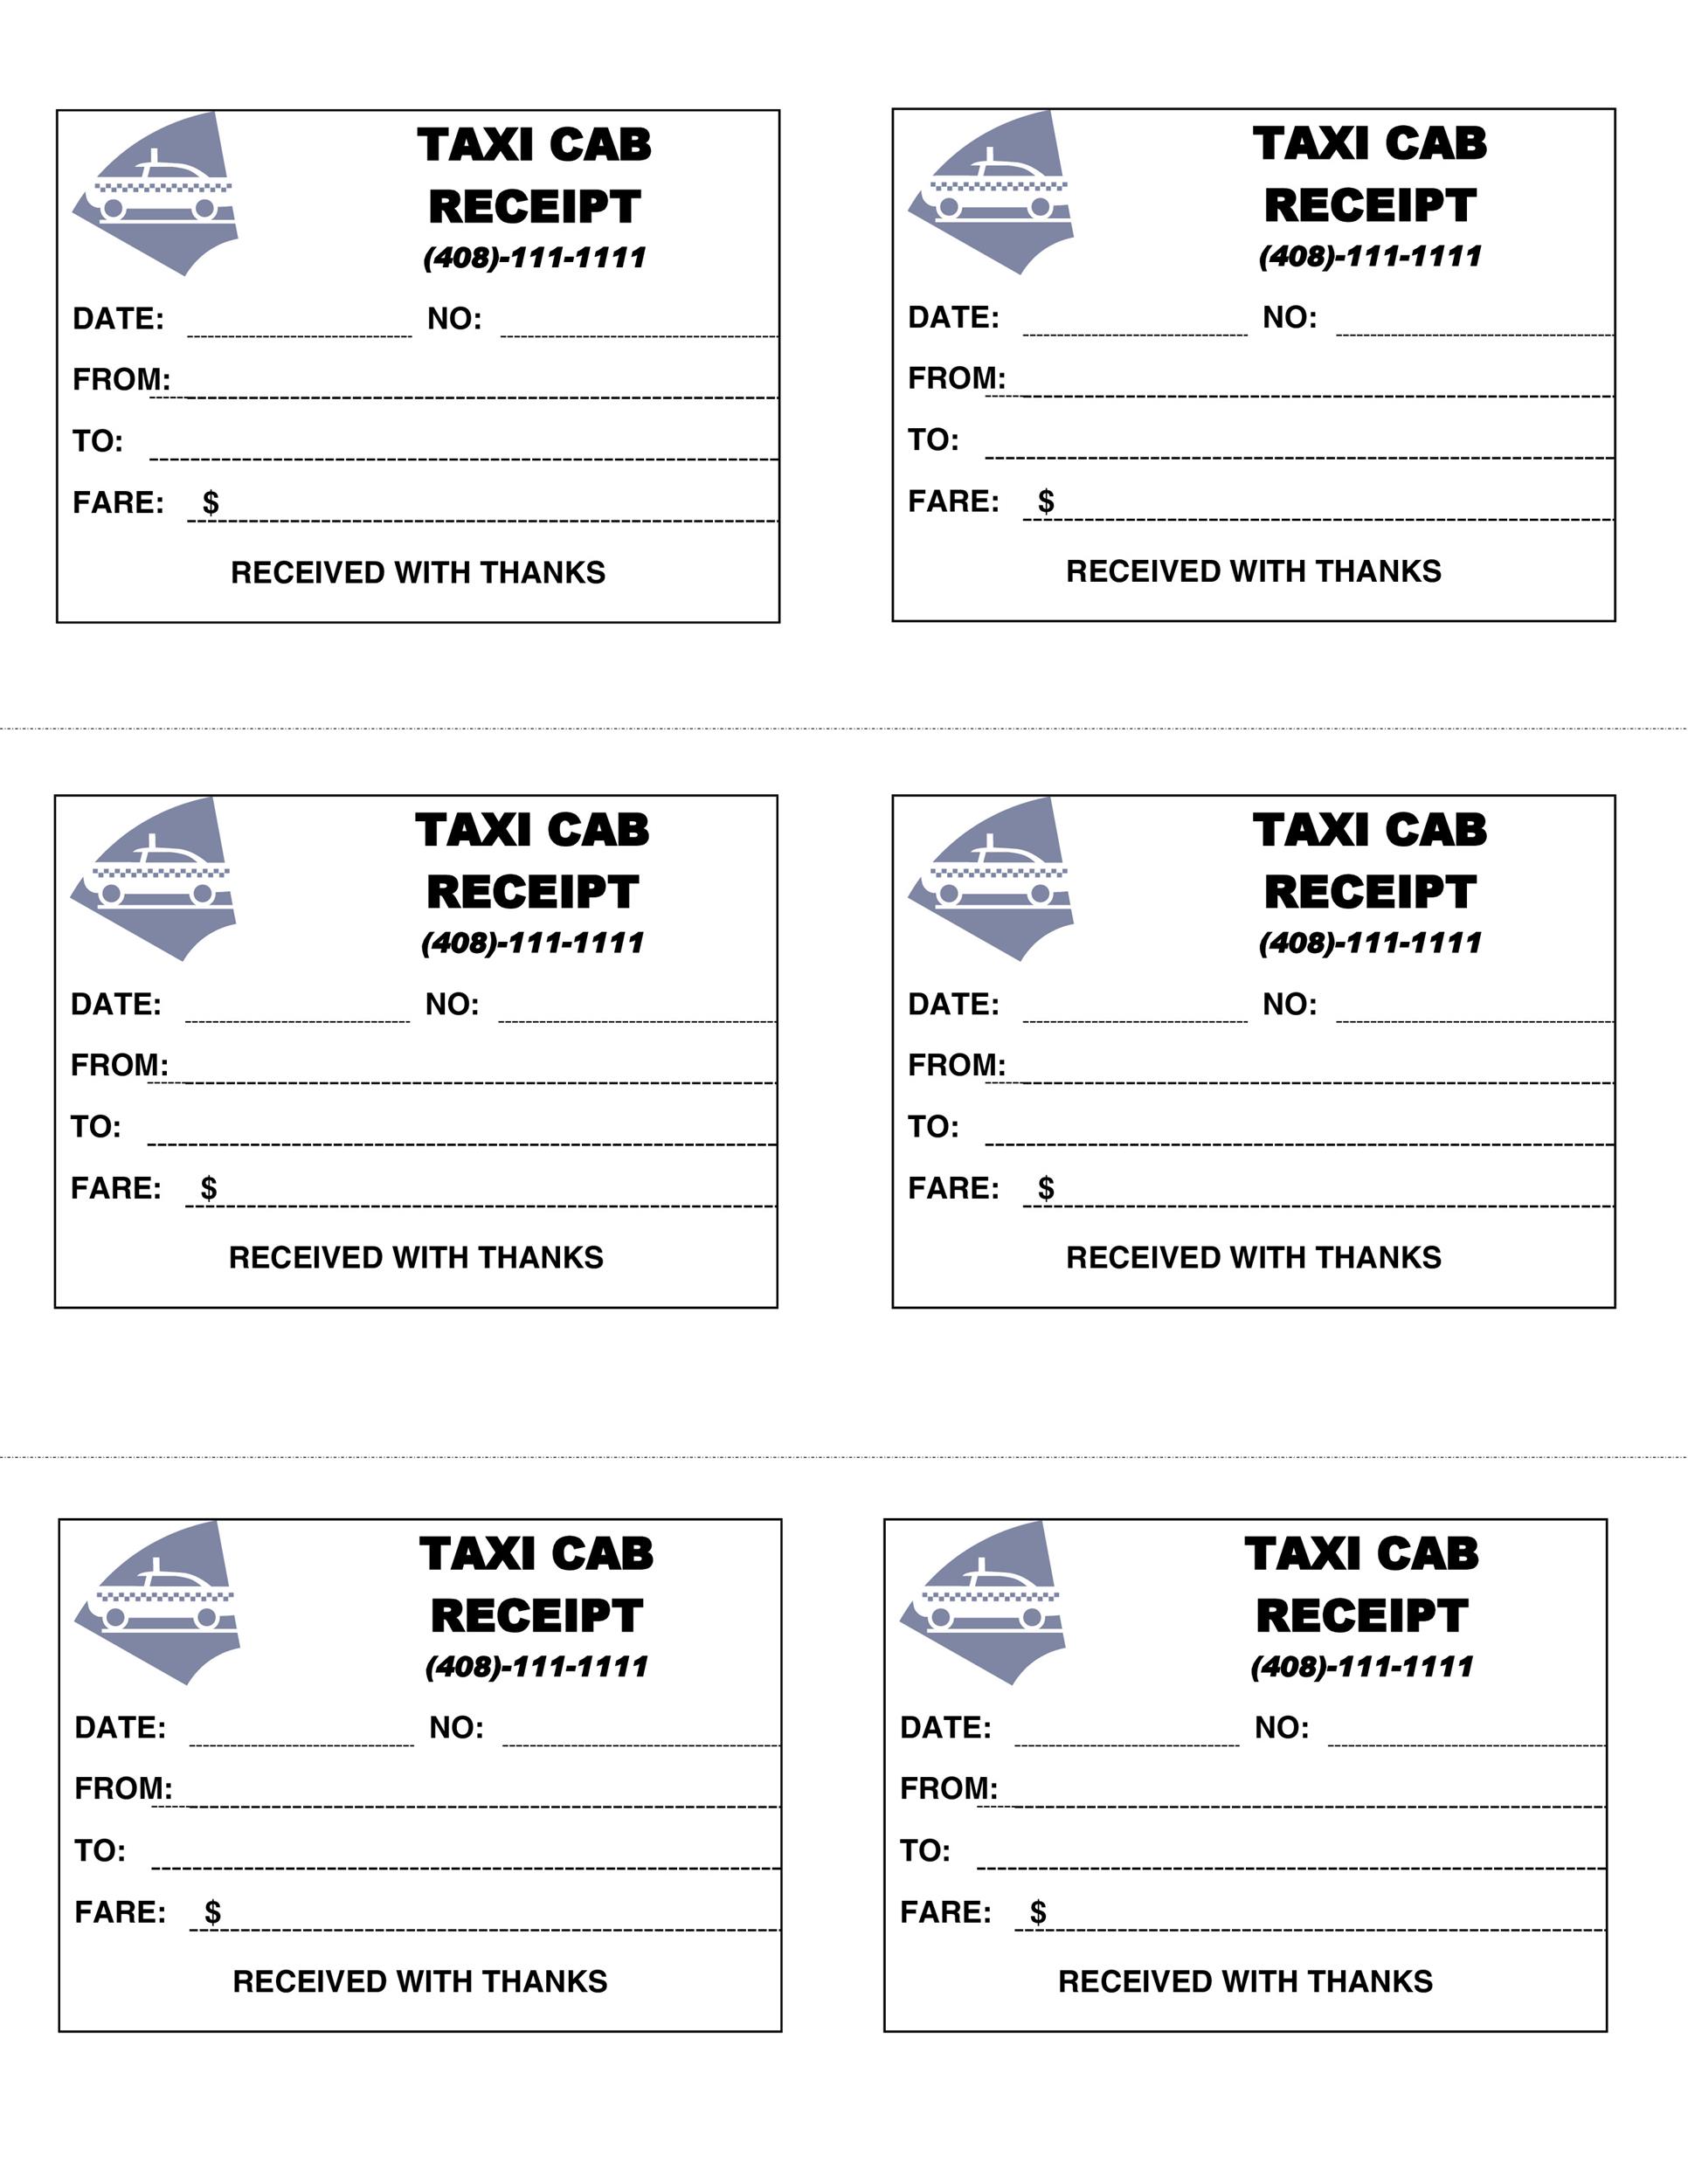 download-blank-printable-taxi-cab-receipt-template-excel-for-blank-taxi-receipt-template